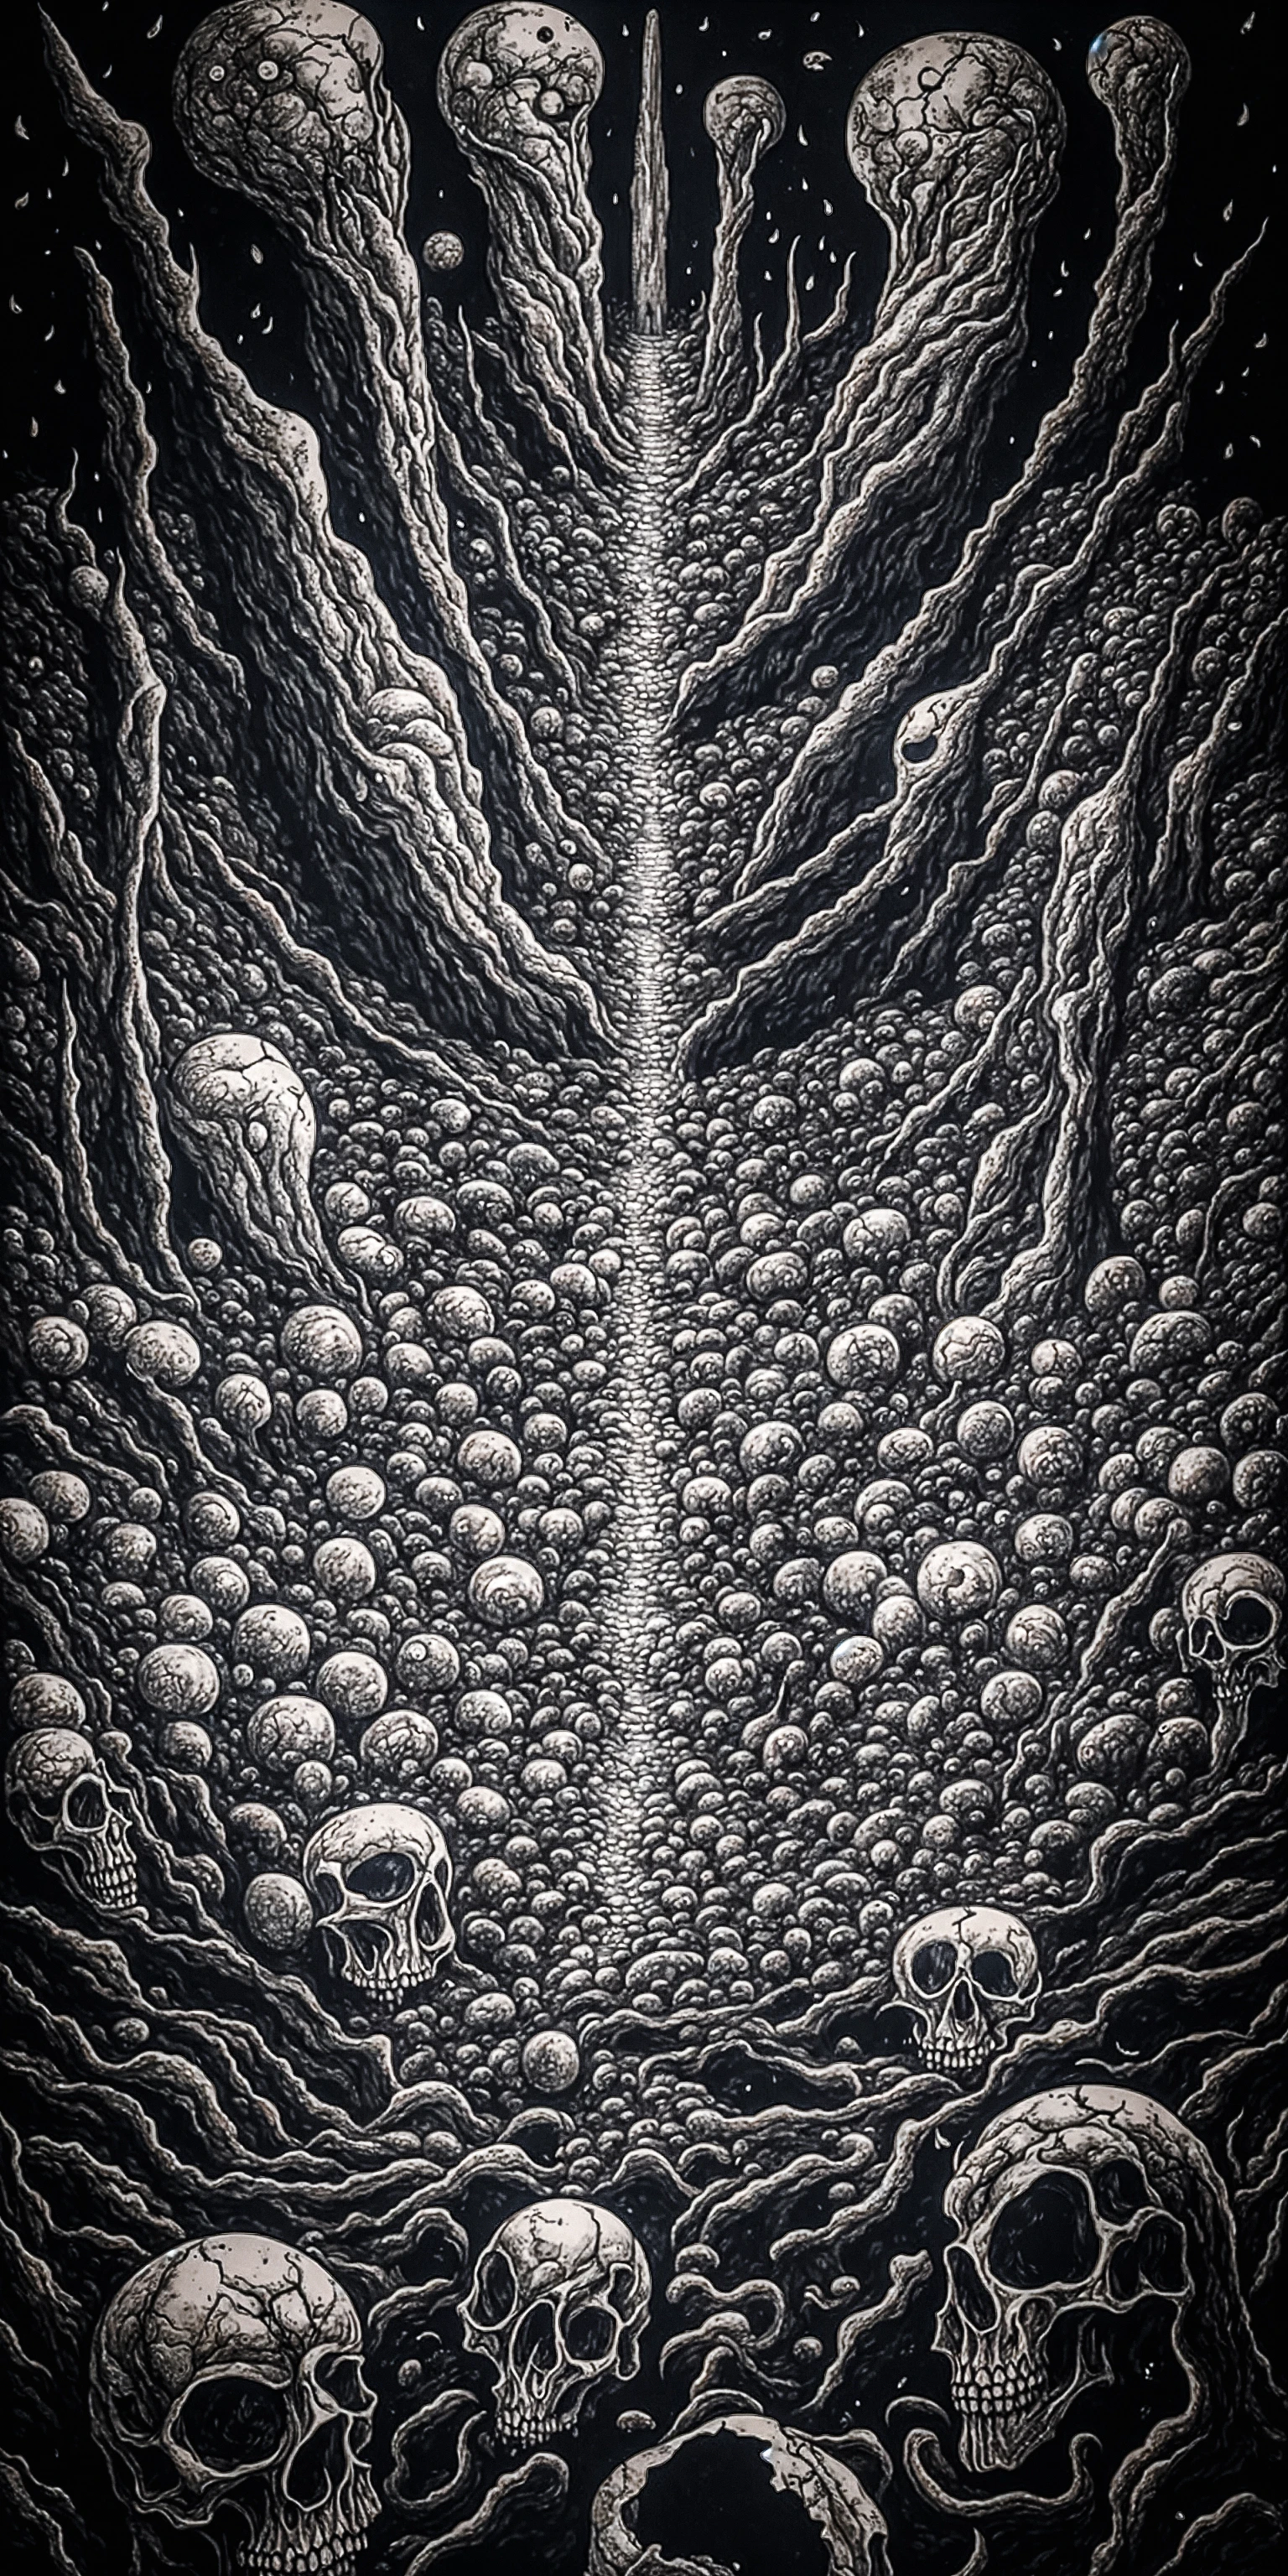 A masterpiece painting of World War 1, Craters,Periscopes,Flanders Fields, Hail, Smoke, Sinister,Shattered, Dread,PTSD,Isolation, Tarot cards, Cross-hatching, Framing, Duotone, ultra detailed, intricate, surrealism, glazing, dry brush, oil on canvas